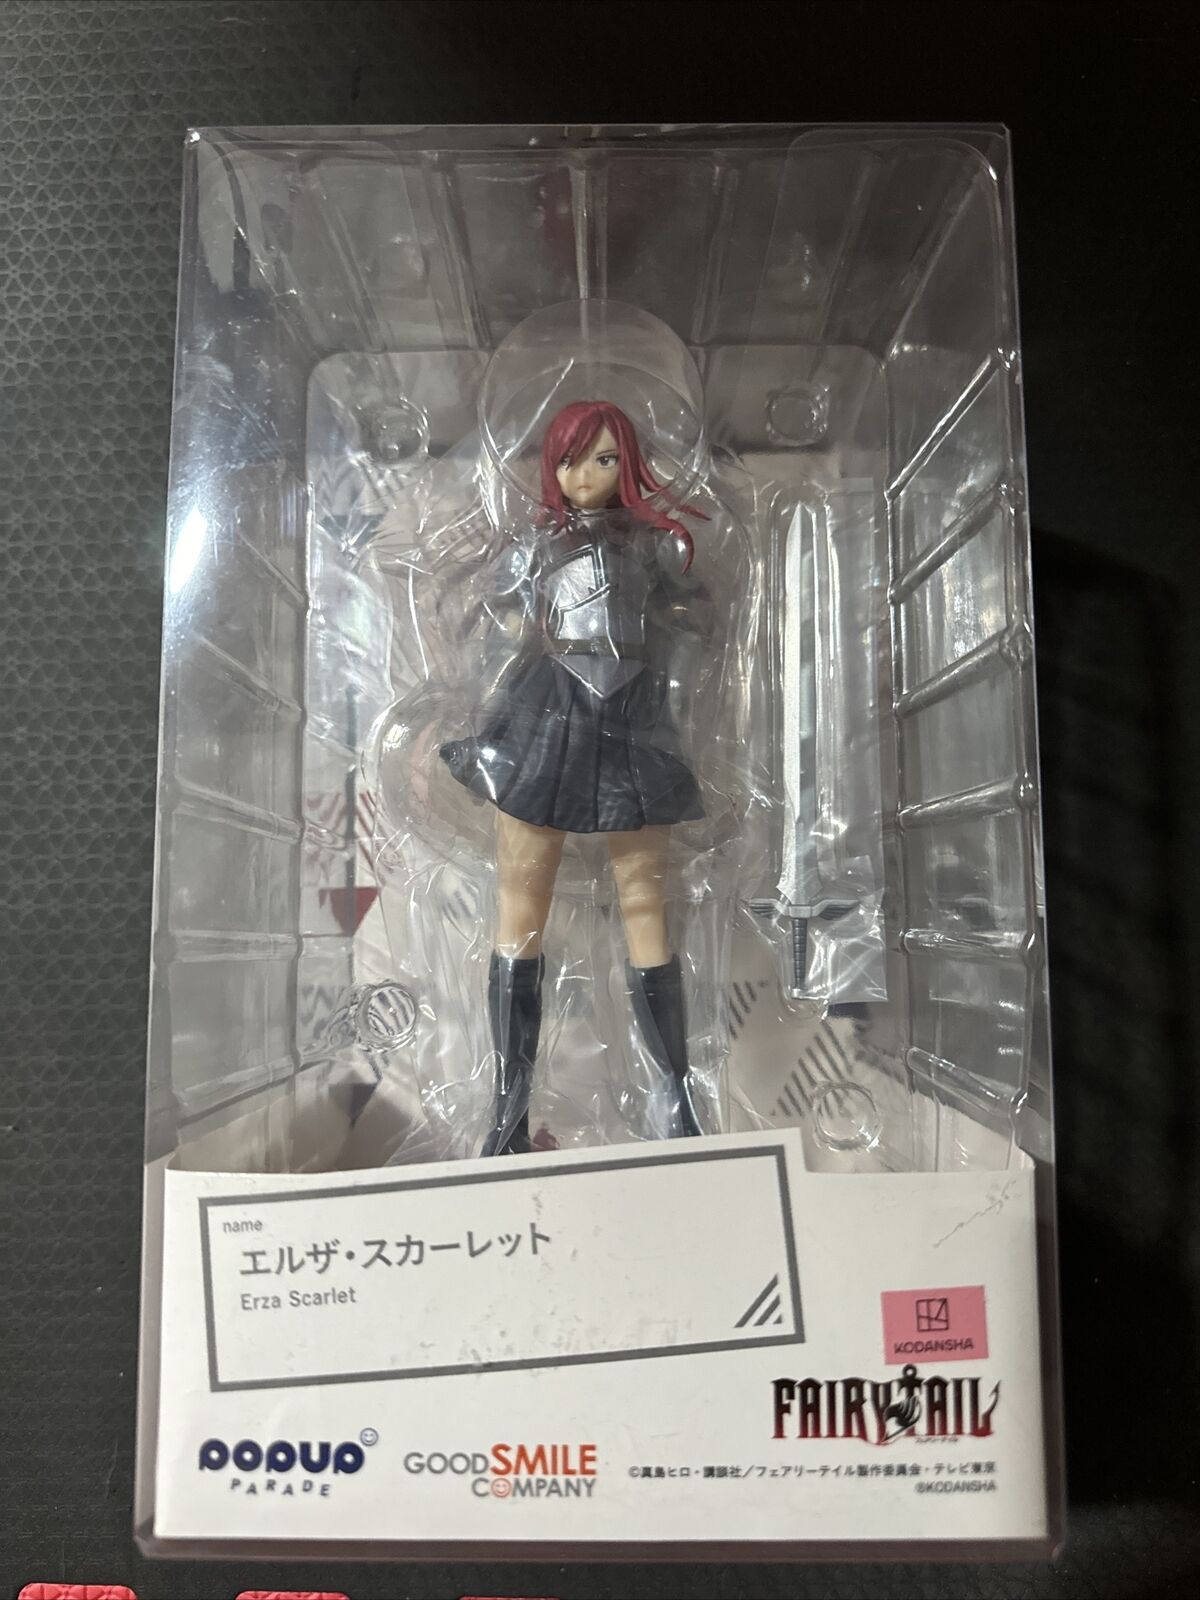 Fairy Tail Erza Scarlet Pop Up Parade Statue